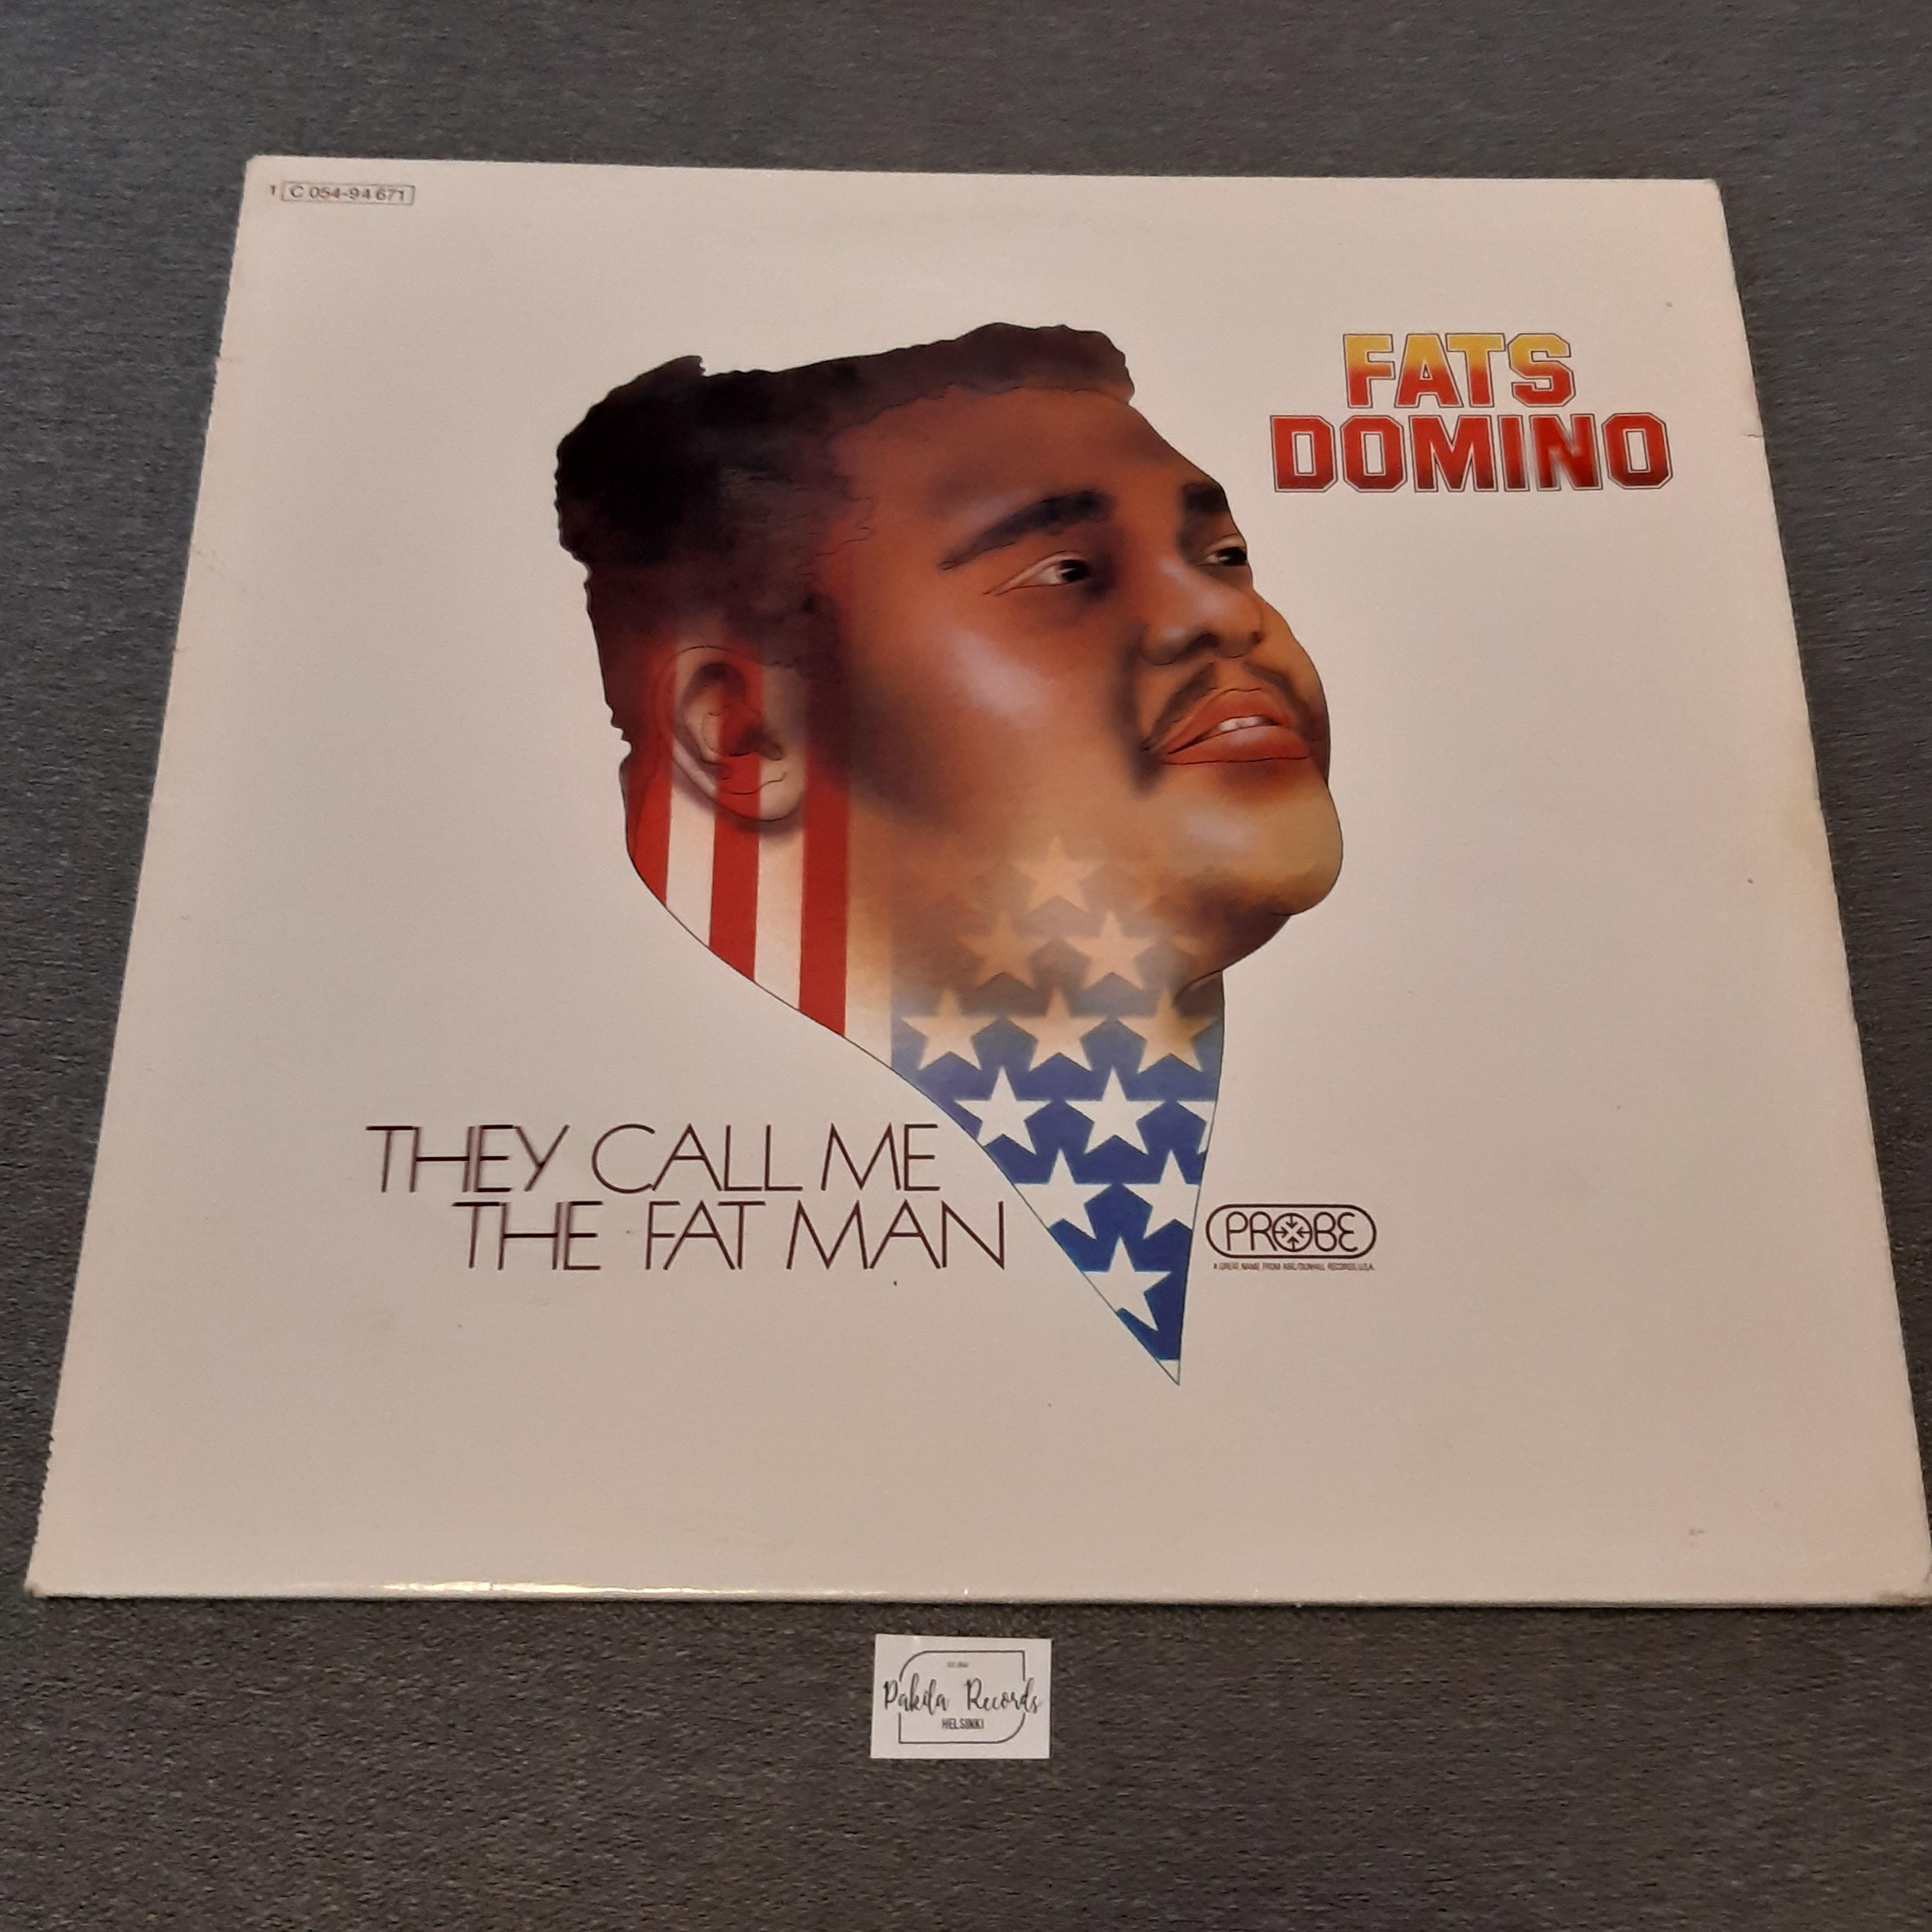 Fats Domino - The Call Me The Fat Man - LP (käytetty)